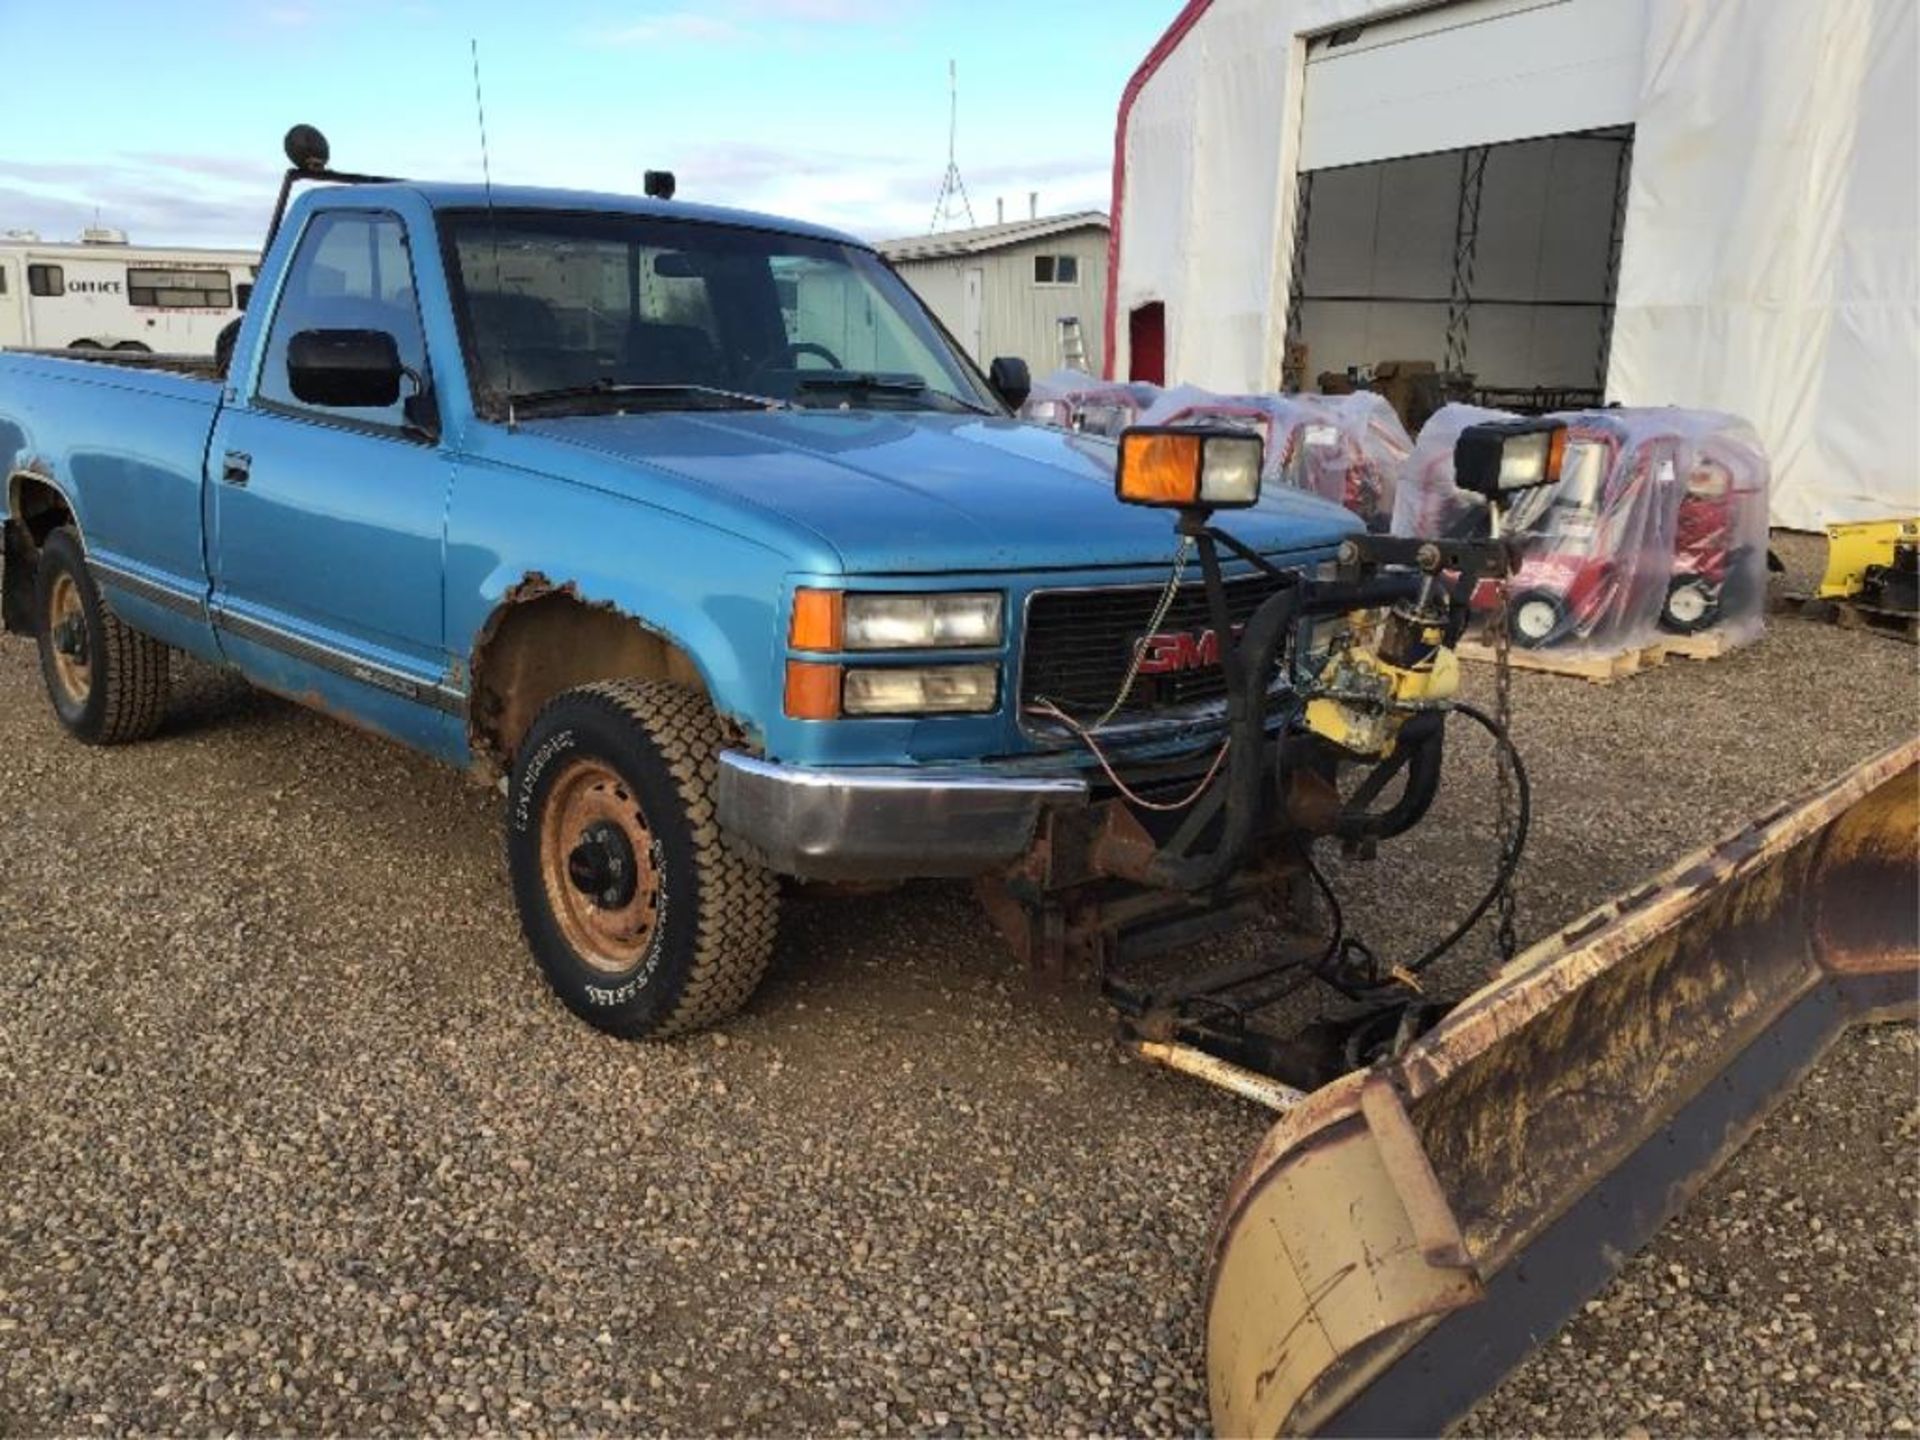 1994 GMC Heavy Half 1500 Pickup Truck VIN 1GTFK24K2RE532345 Comes with Dozer. Very Low km on New - Image 2 of 5